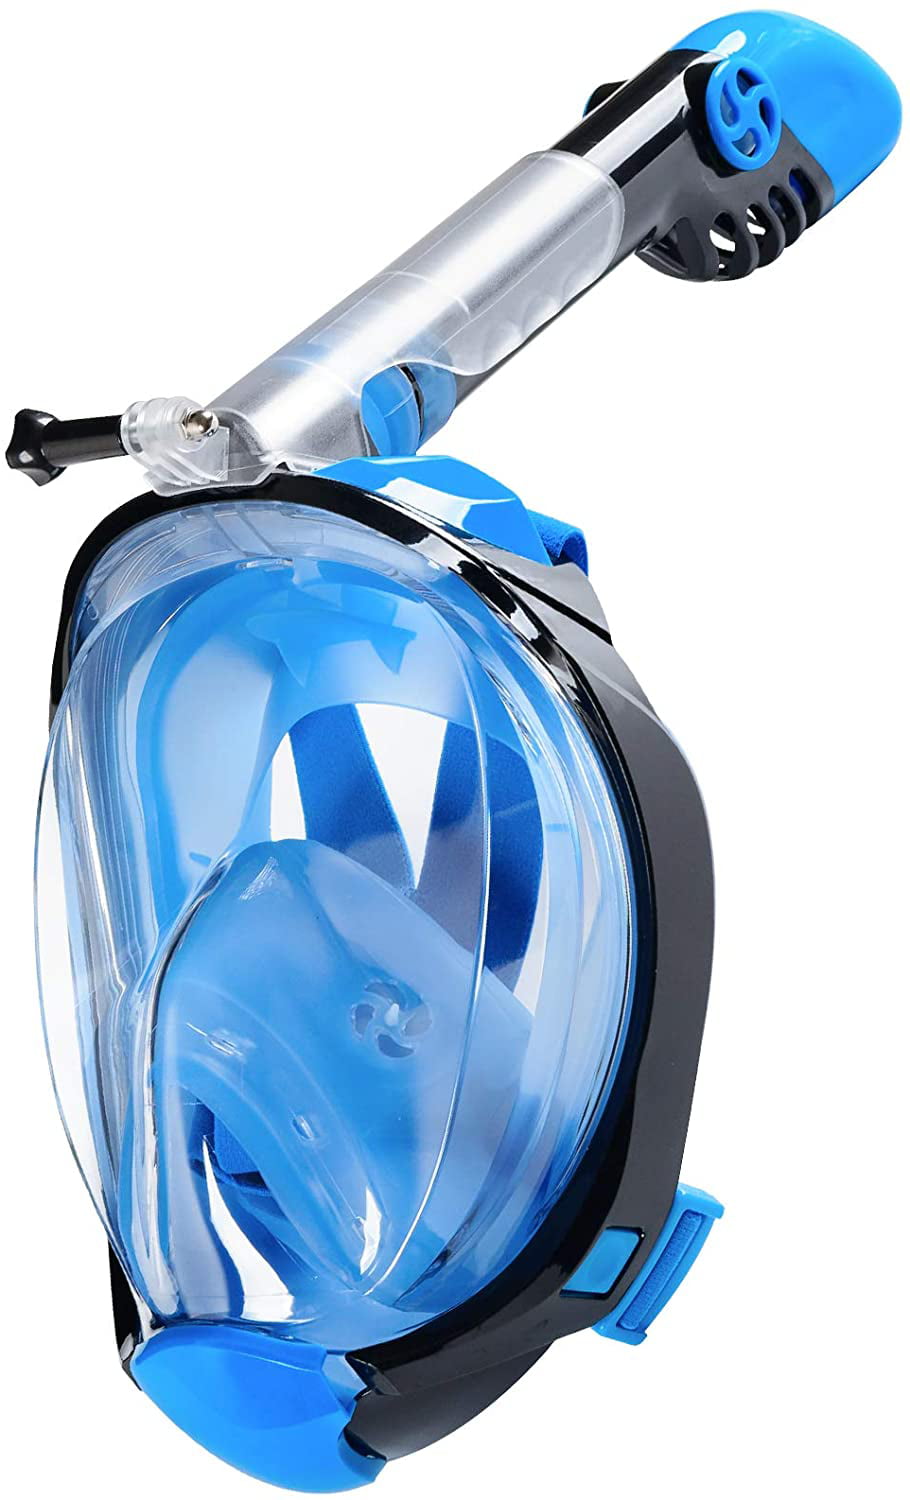 2020 Upgraded Full Face Snorkel Mask Foldable Snorkeling Mask 180 Degree View 